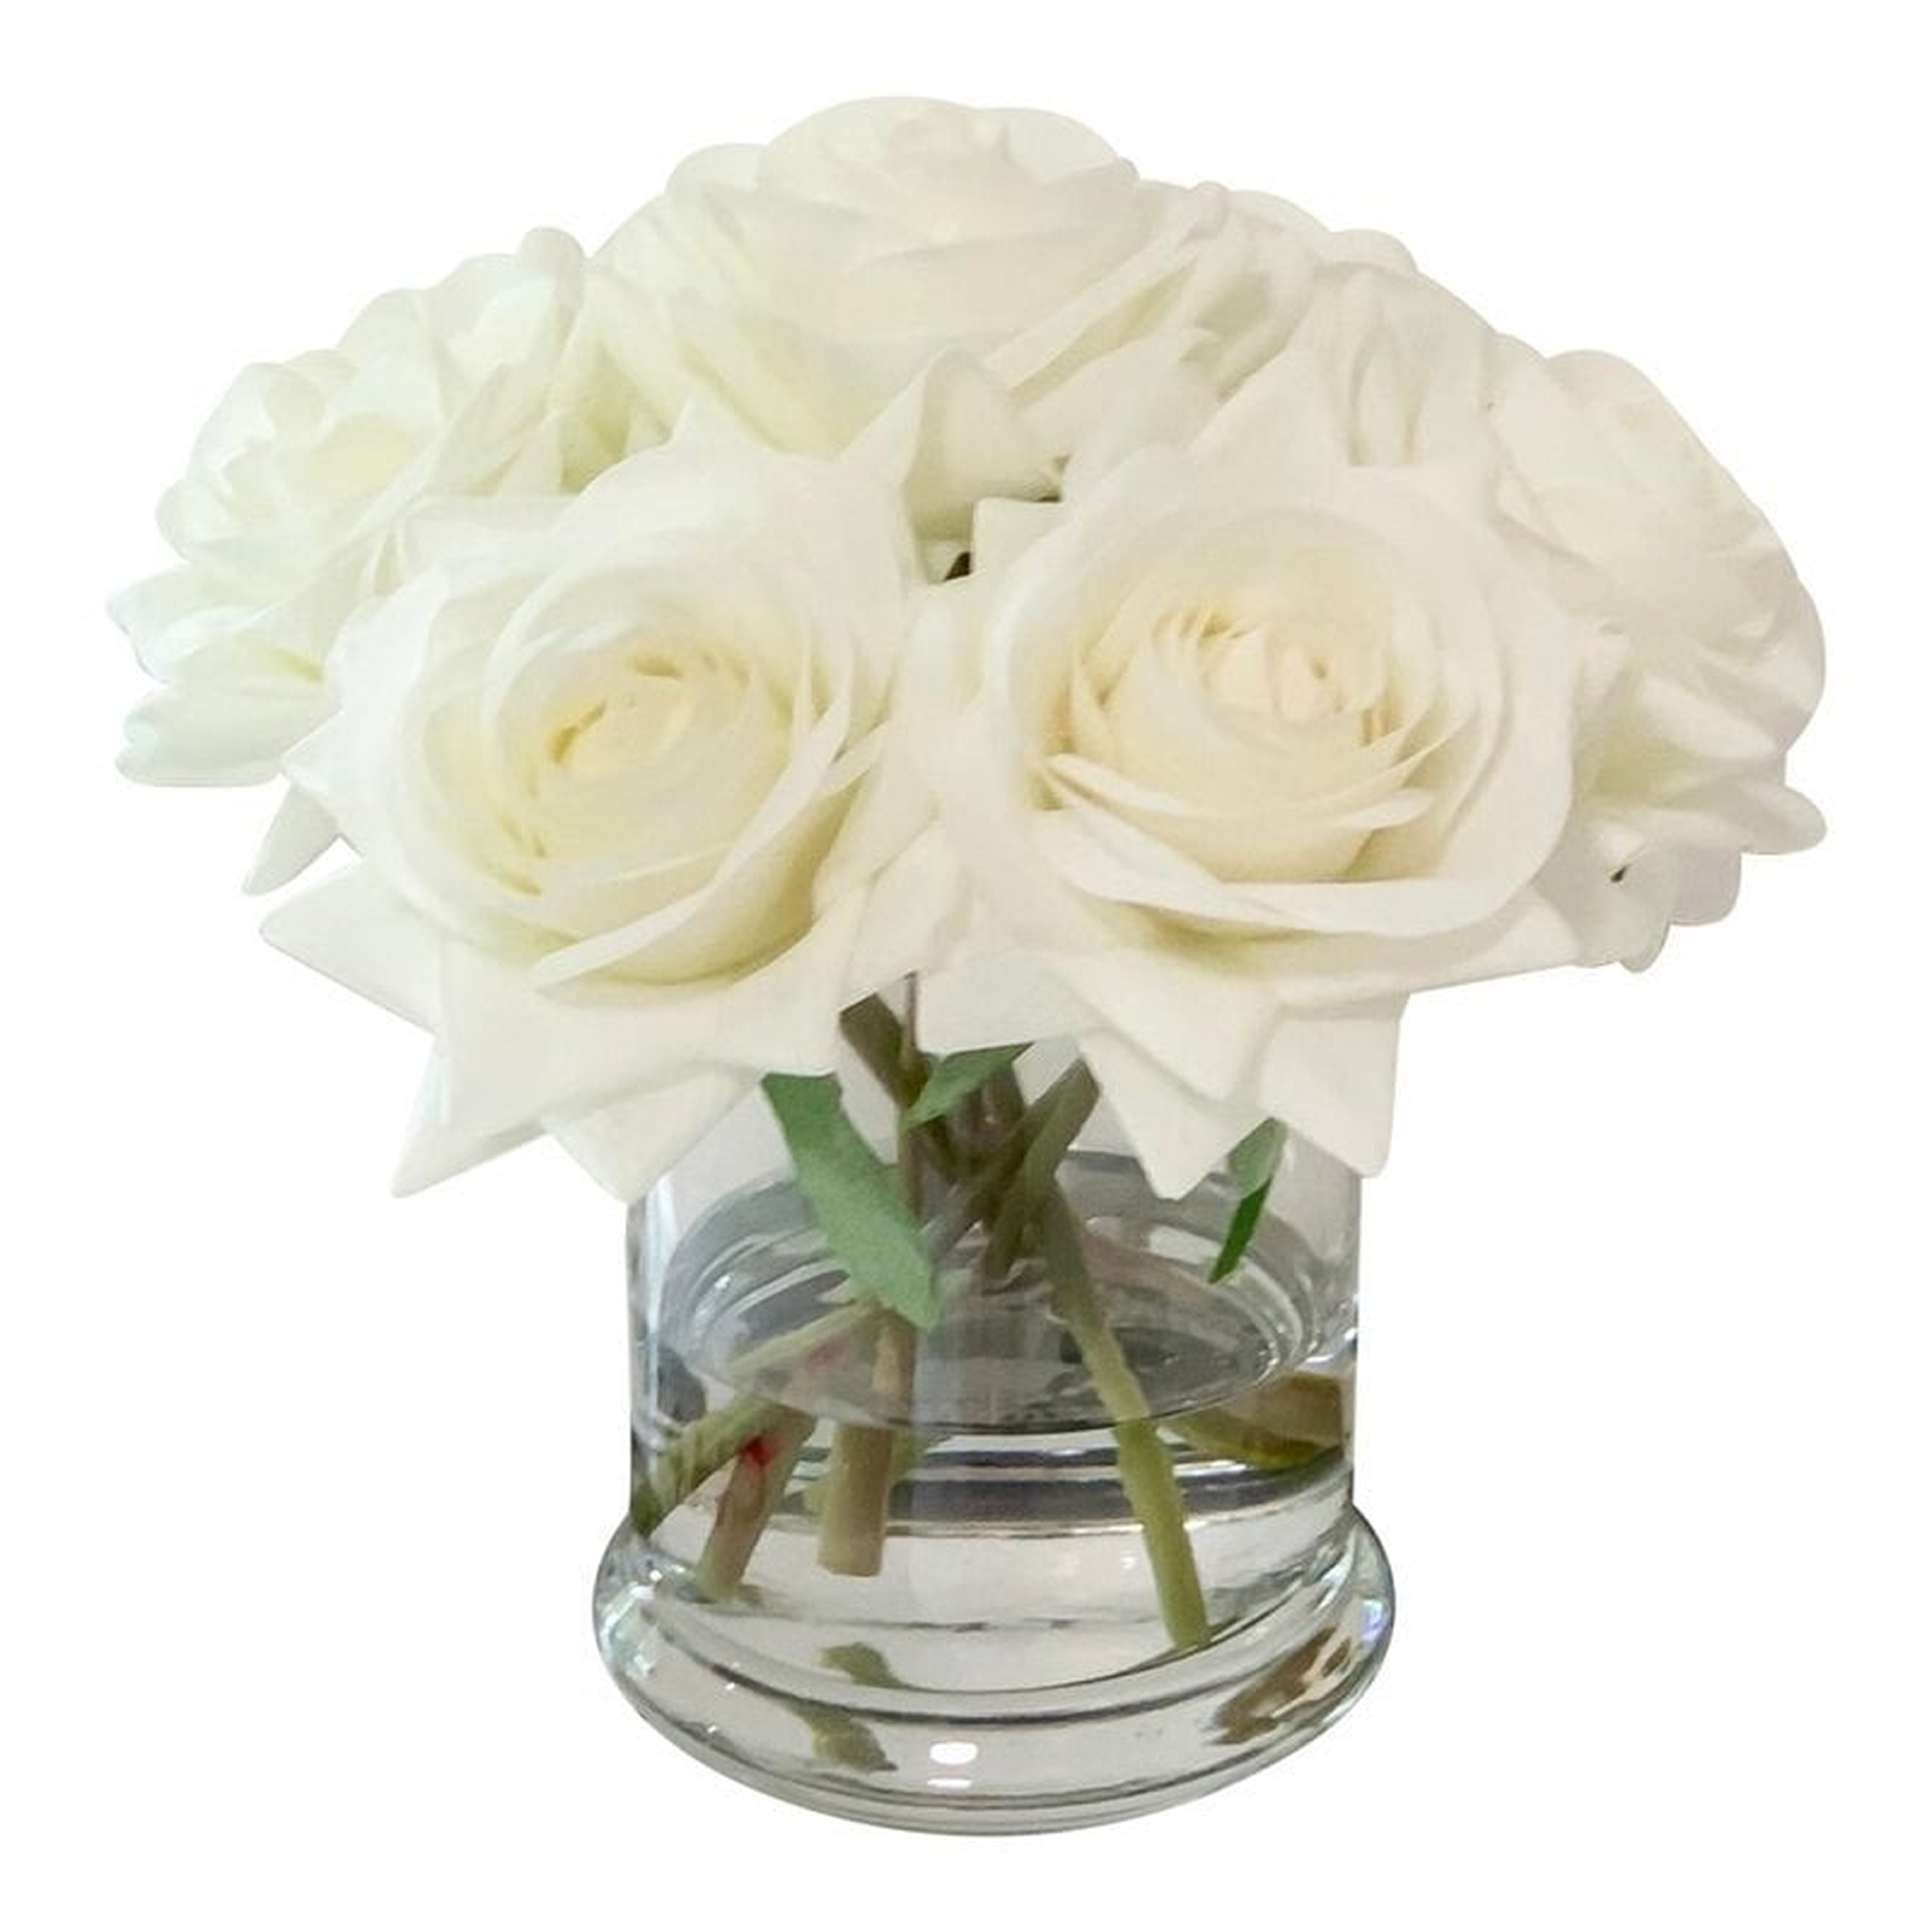 Real Touch Roses Floral Arrangements in Glass Vase, White - Wayfair